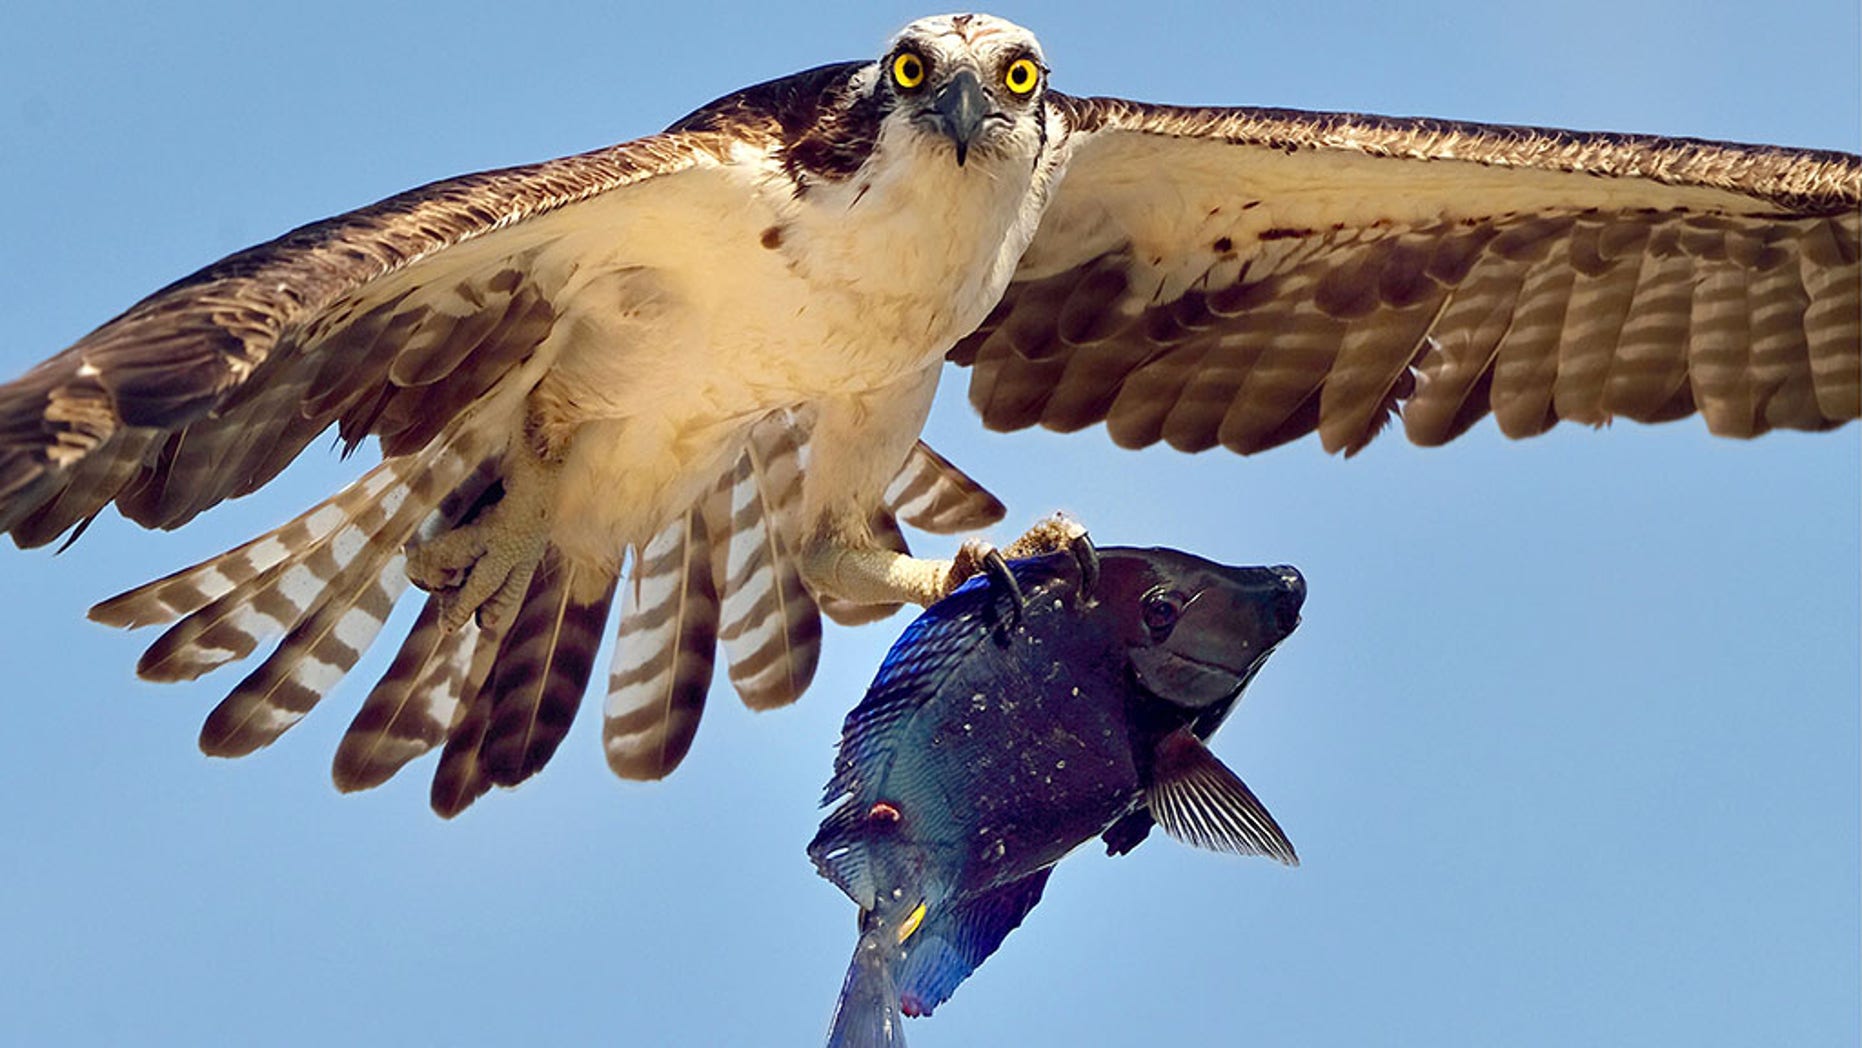 Osprey carries off vibrant blue coral reef fish in Aruba, stunning images show